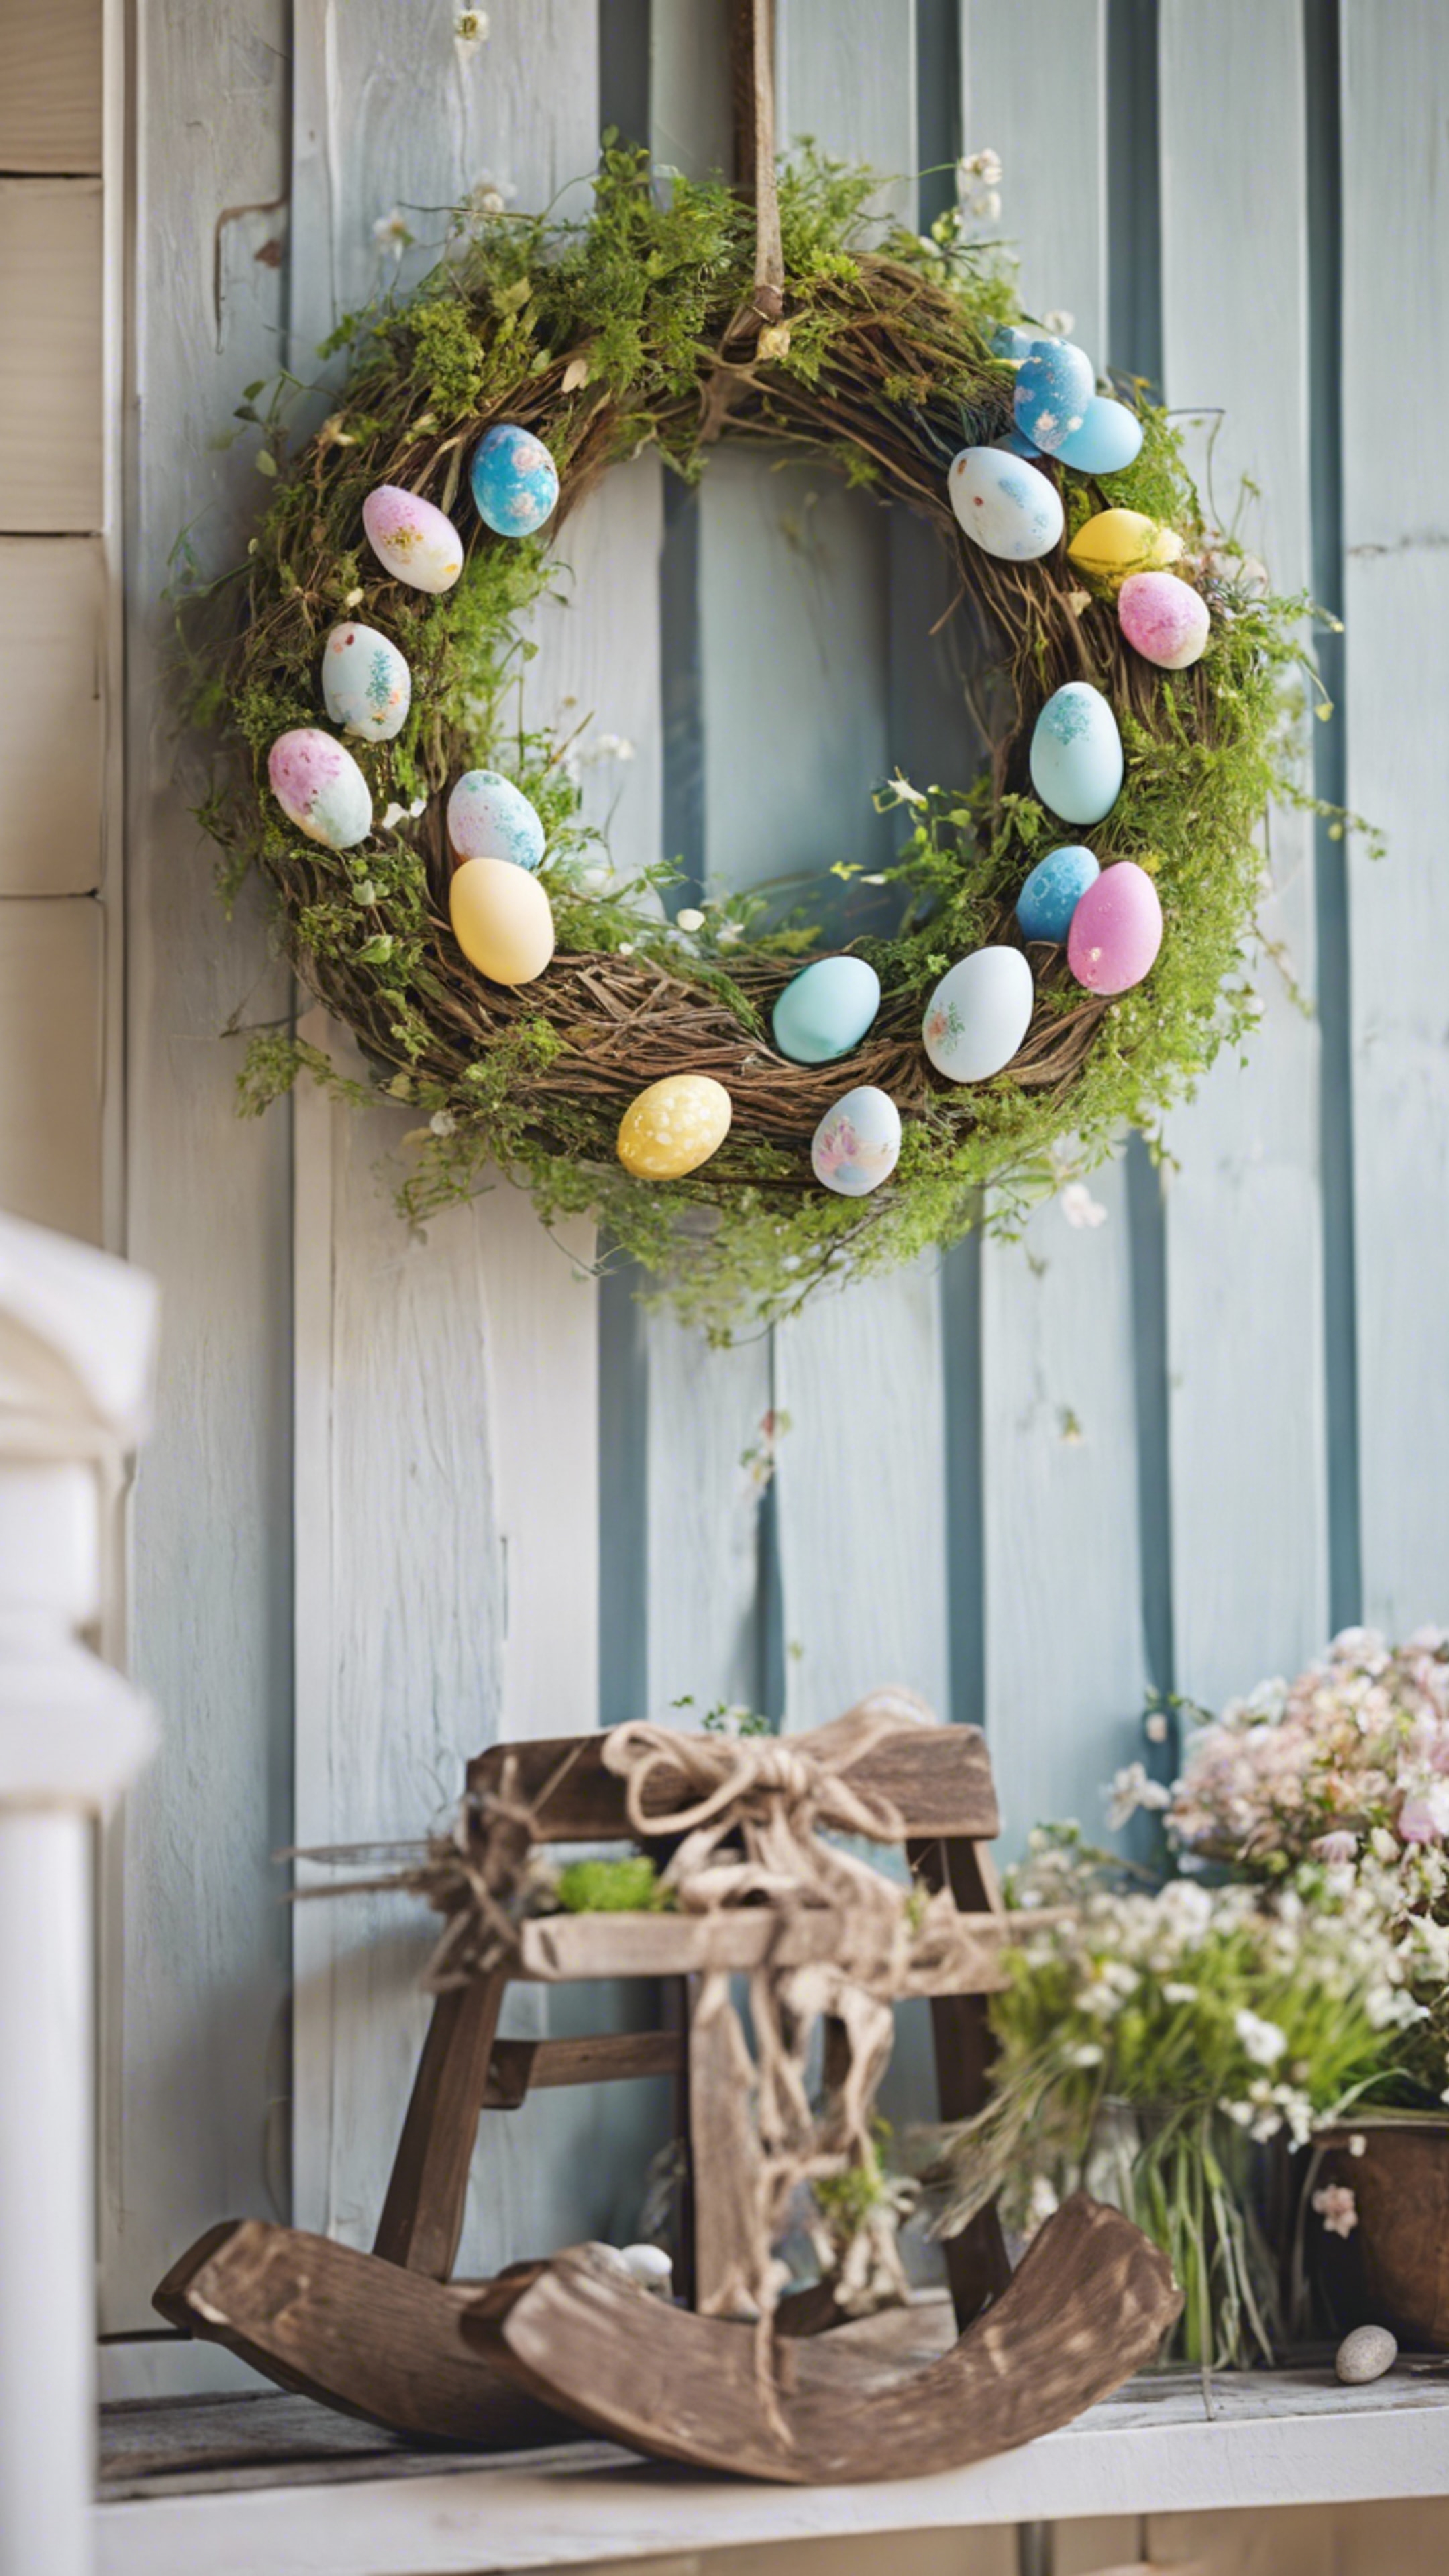 Country-style Easter decorative wreath hanging on a front porch, inviting the spring spirits. Hình nền[efa72fd9539f4de39955]